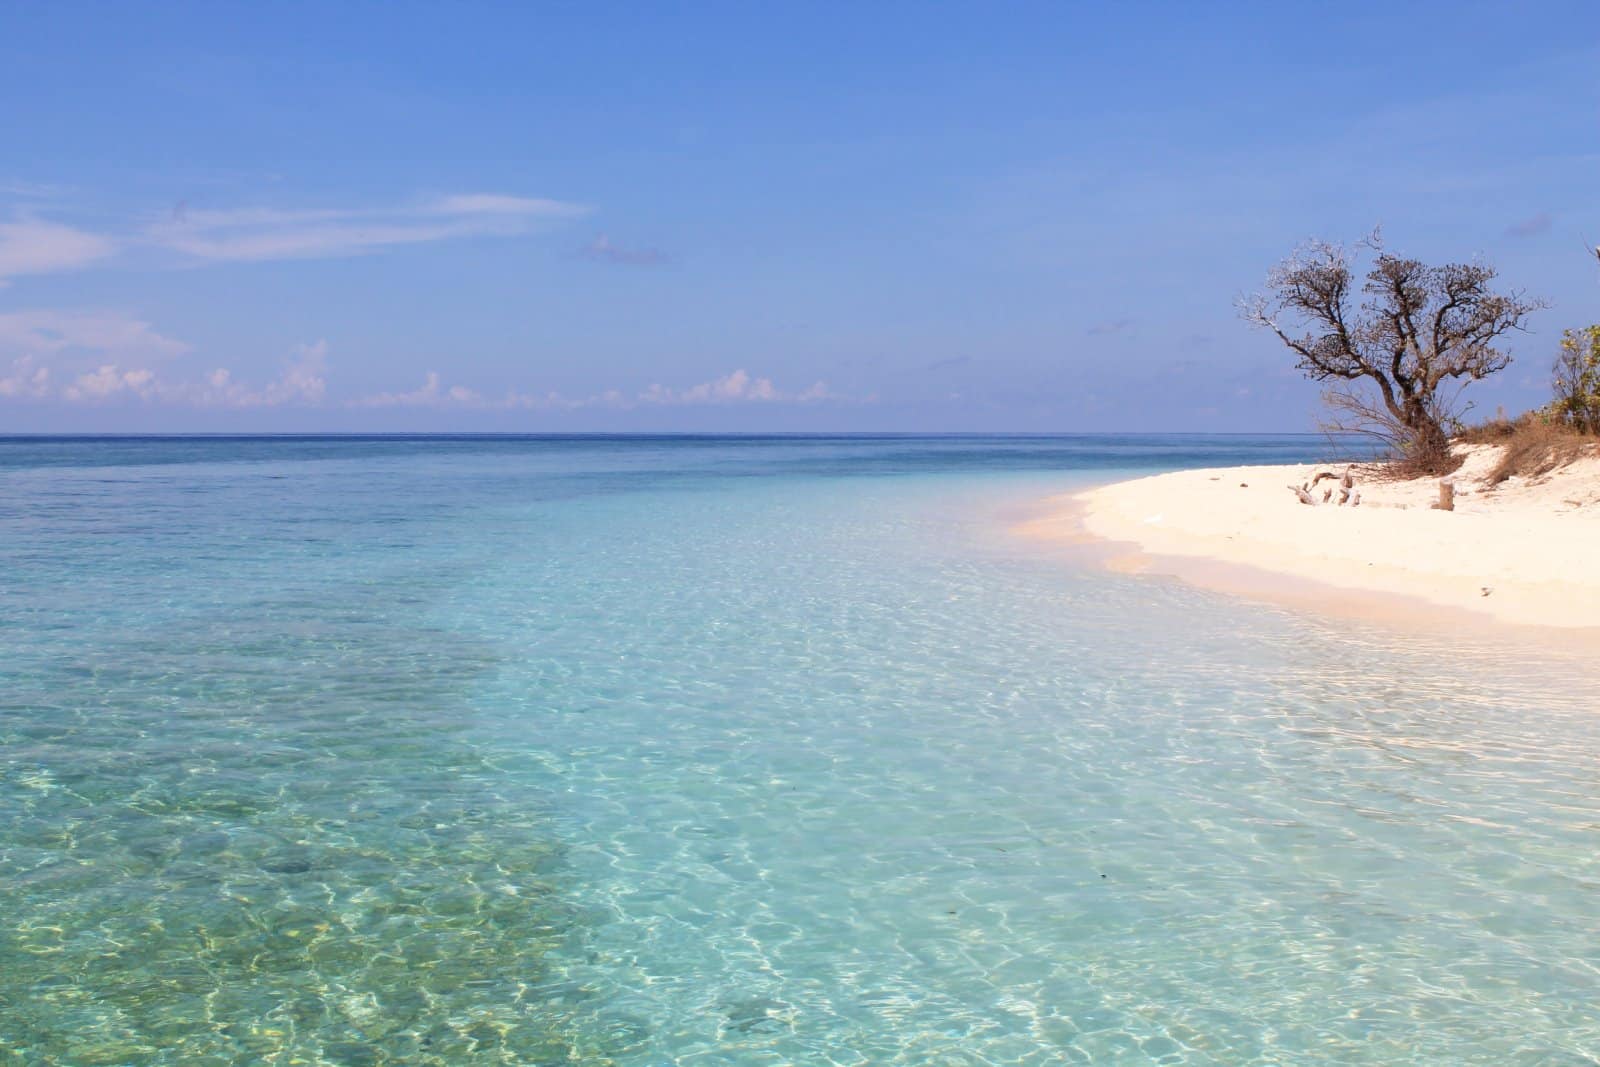 <p class="wp-caption-text">Image Credit: Shutterstock / excursionista.net</p>  <p><span>Mindoro is split into two provinces, Oriental and Occidental, and is famous for its diving spots, particularly around Puerto Galera in Oriental Mindoro, which is part of the Verde Island Passage, one of the most biodiverse marine corridors in the world. Apart from its underwater allure, Mindoro boasts beautiful beaches, hidden waterfalls, and indigenous Mangyan villages, offering a glimpse into the island’s rich cultural tapestry.</span></p>